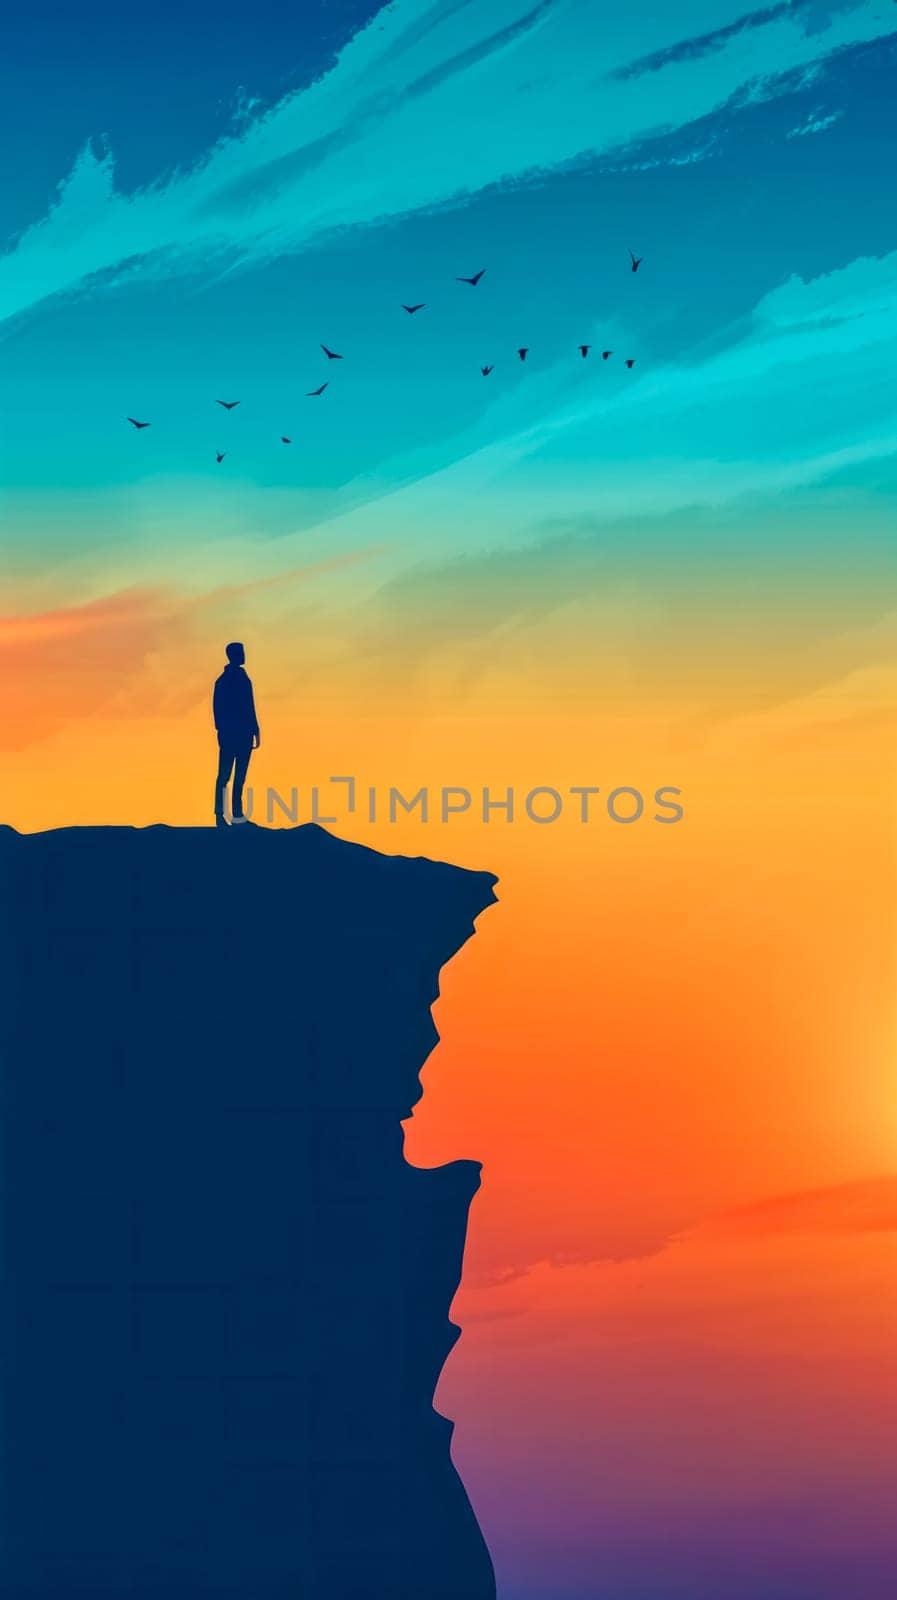 A solitary figure stands atop a cliff with a serene sunset backdrop, evoking contemplation and freedom. by Edophoto